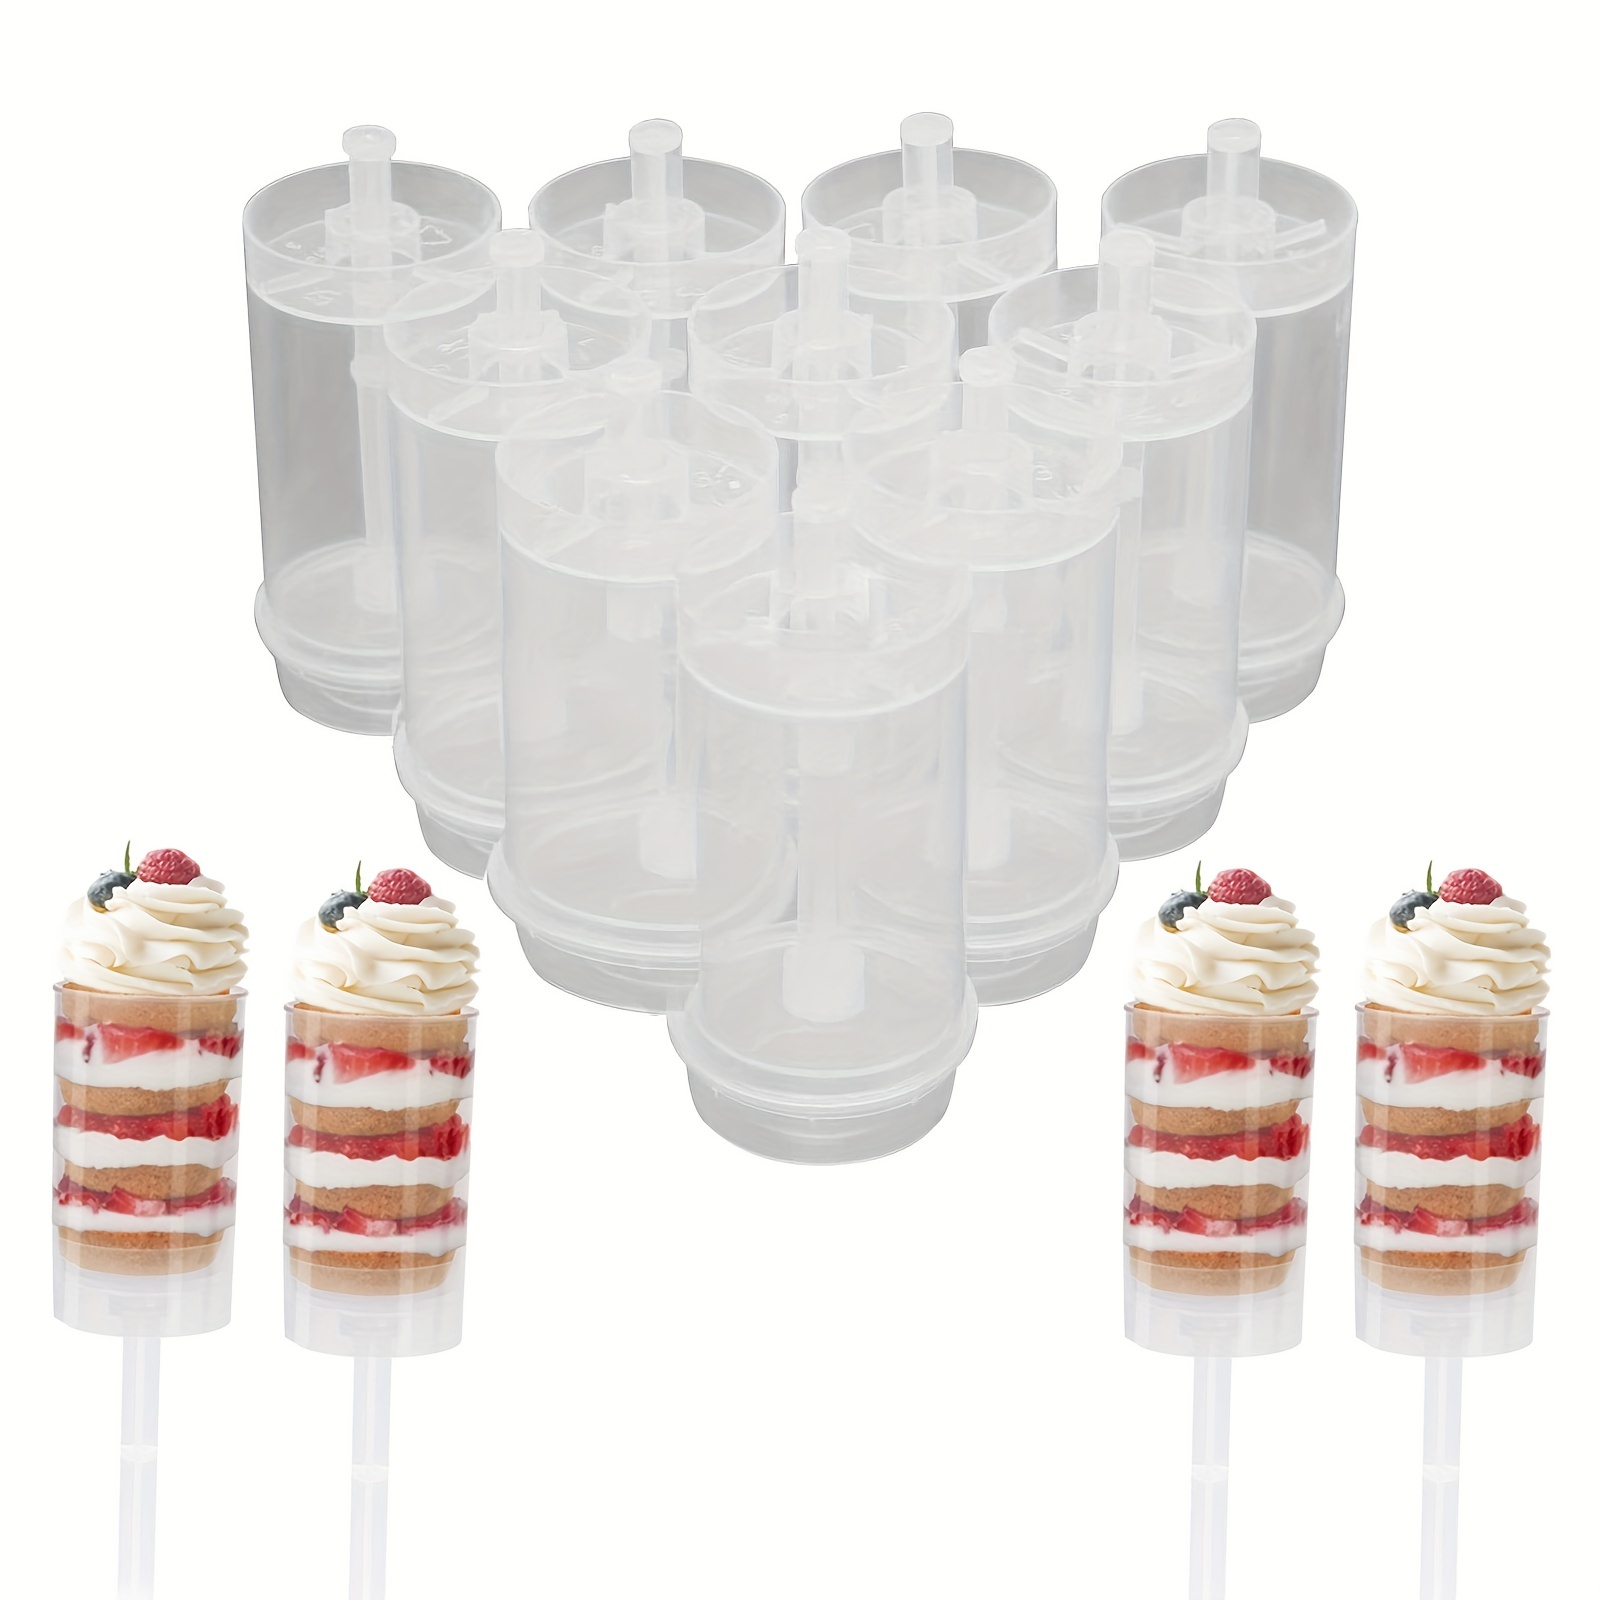 30 Hole Push Pop Cake Stand and 30 Clear Cake Pop Shooter Plastic Cake  Containers Push up Containers Shooter Cups with Lids Cake Pop Tray Holder  for